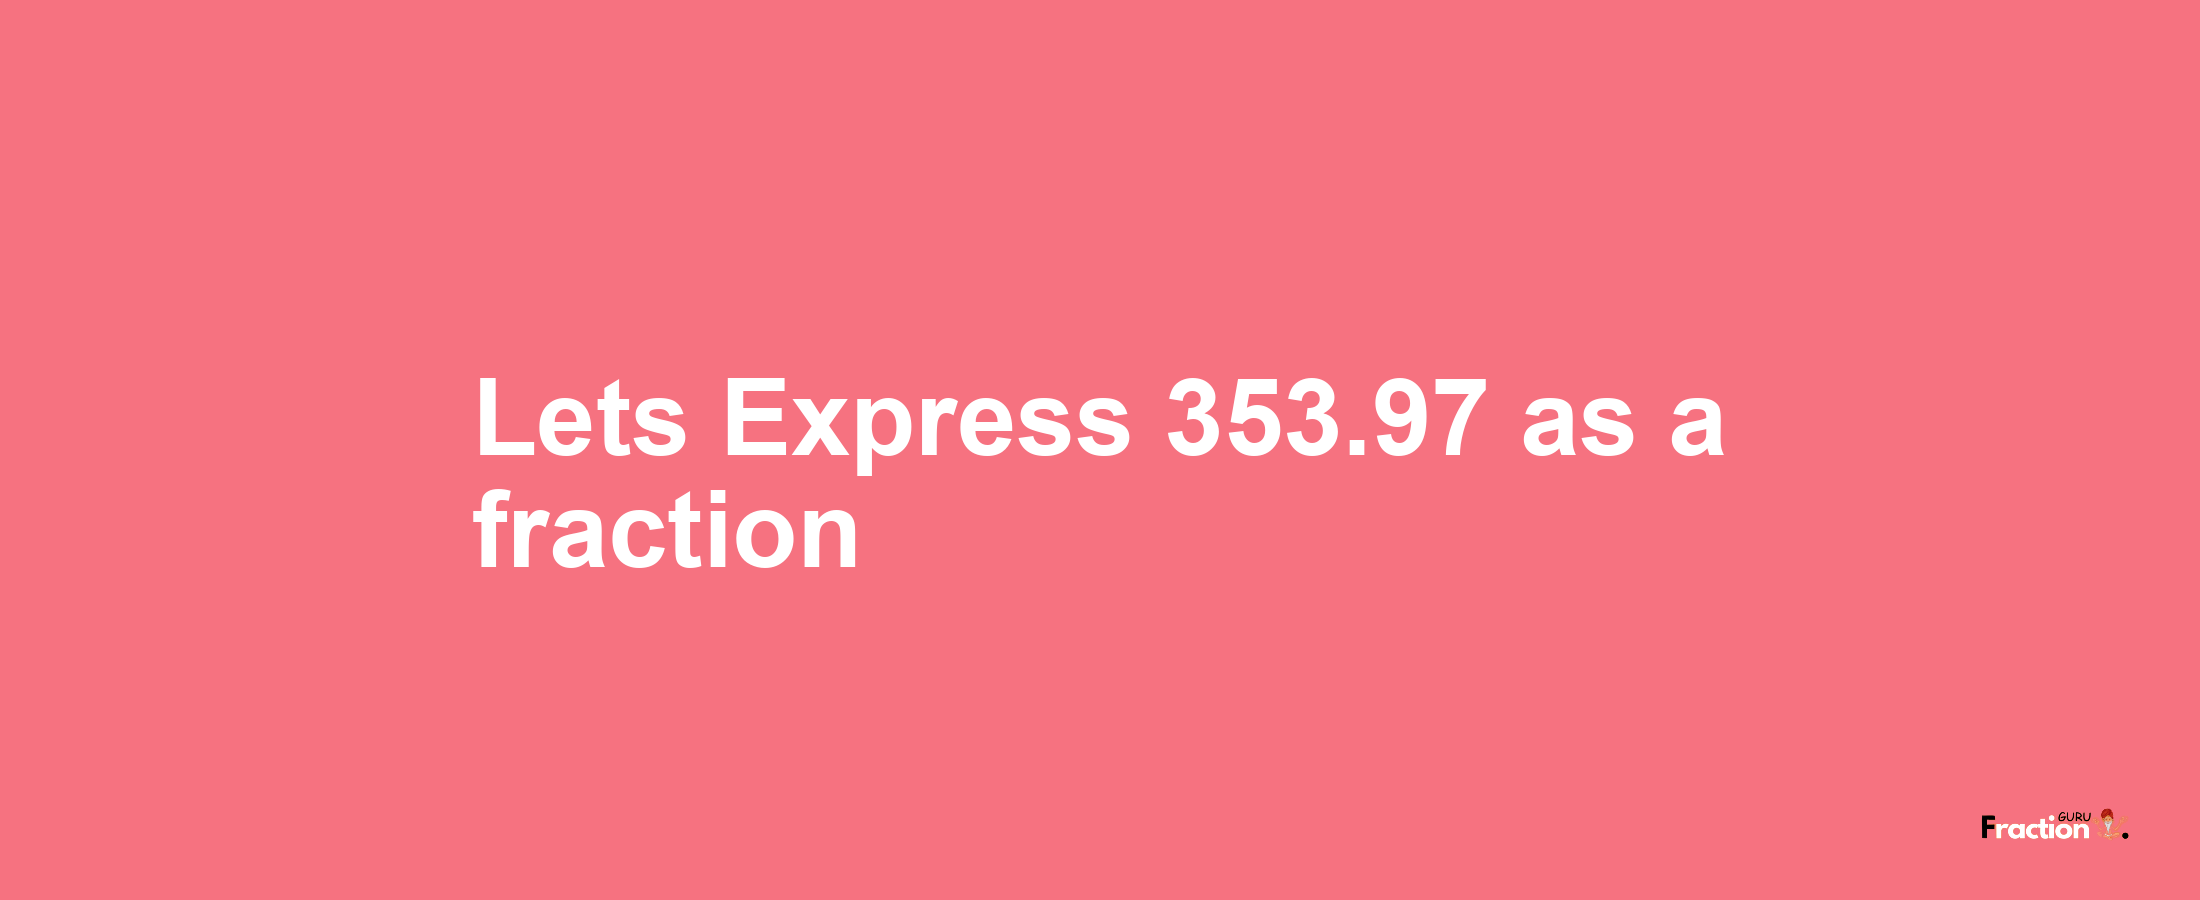 Lets Express 353.97 as afraction